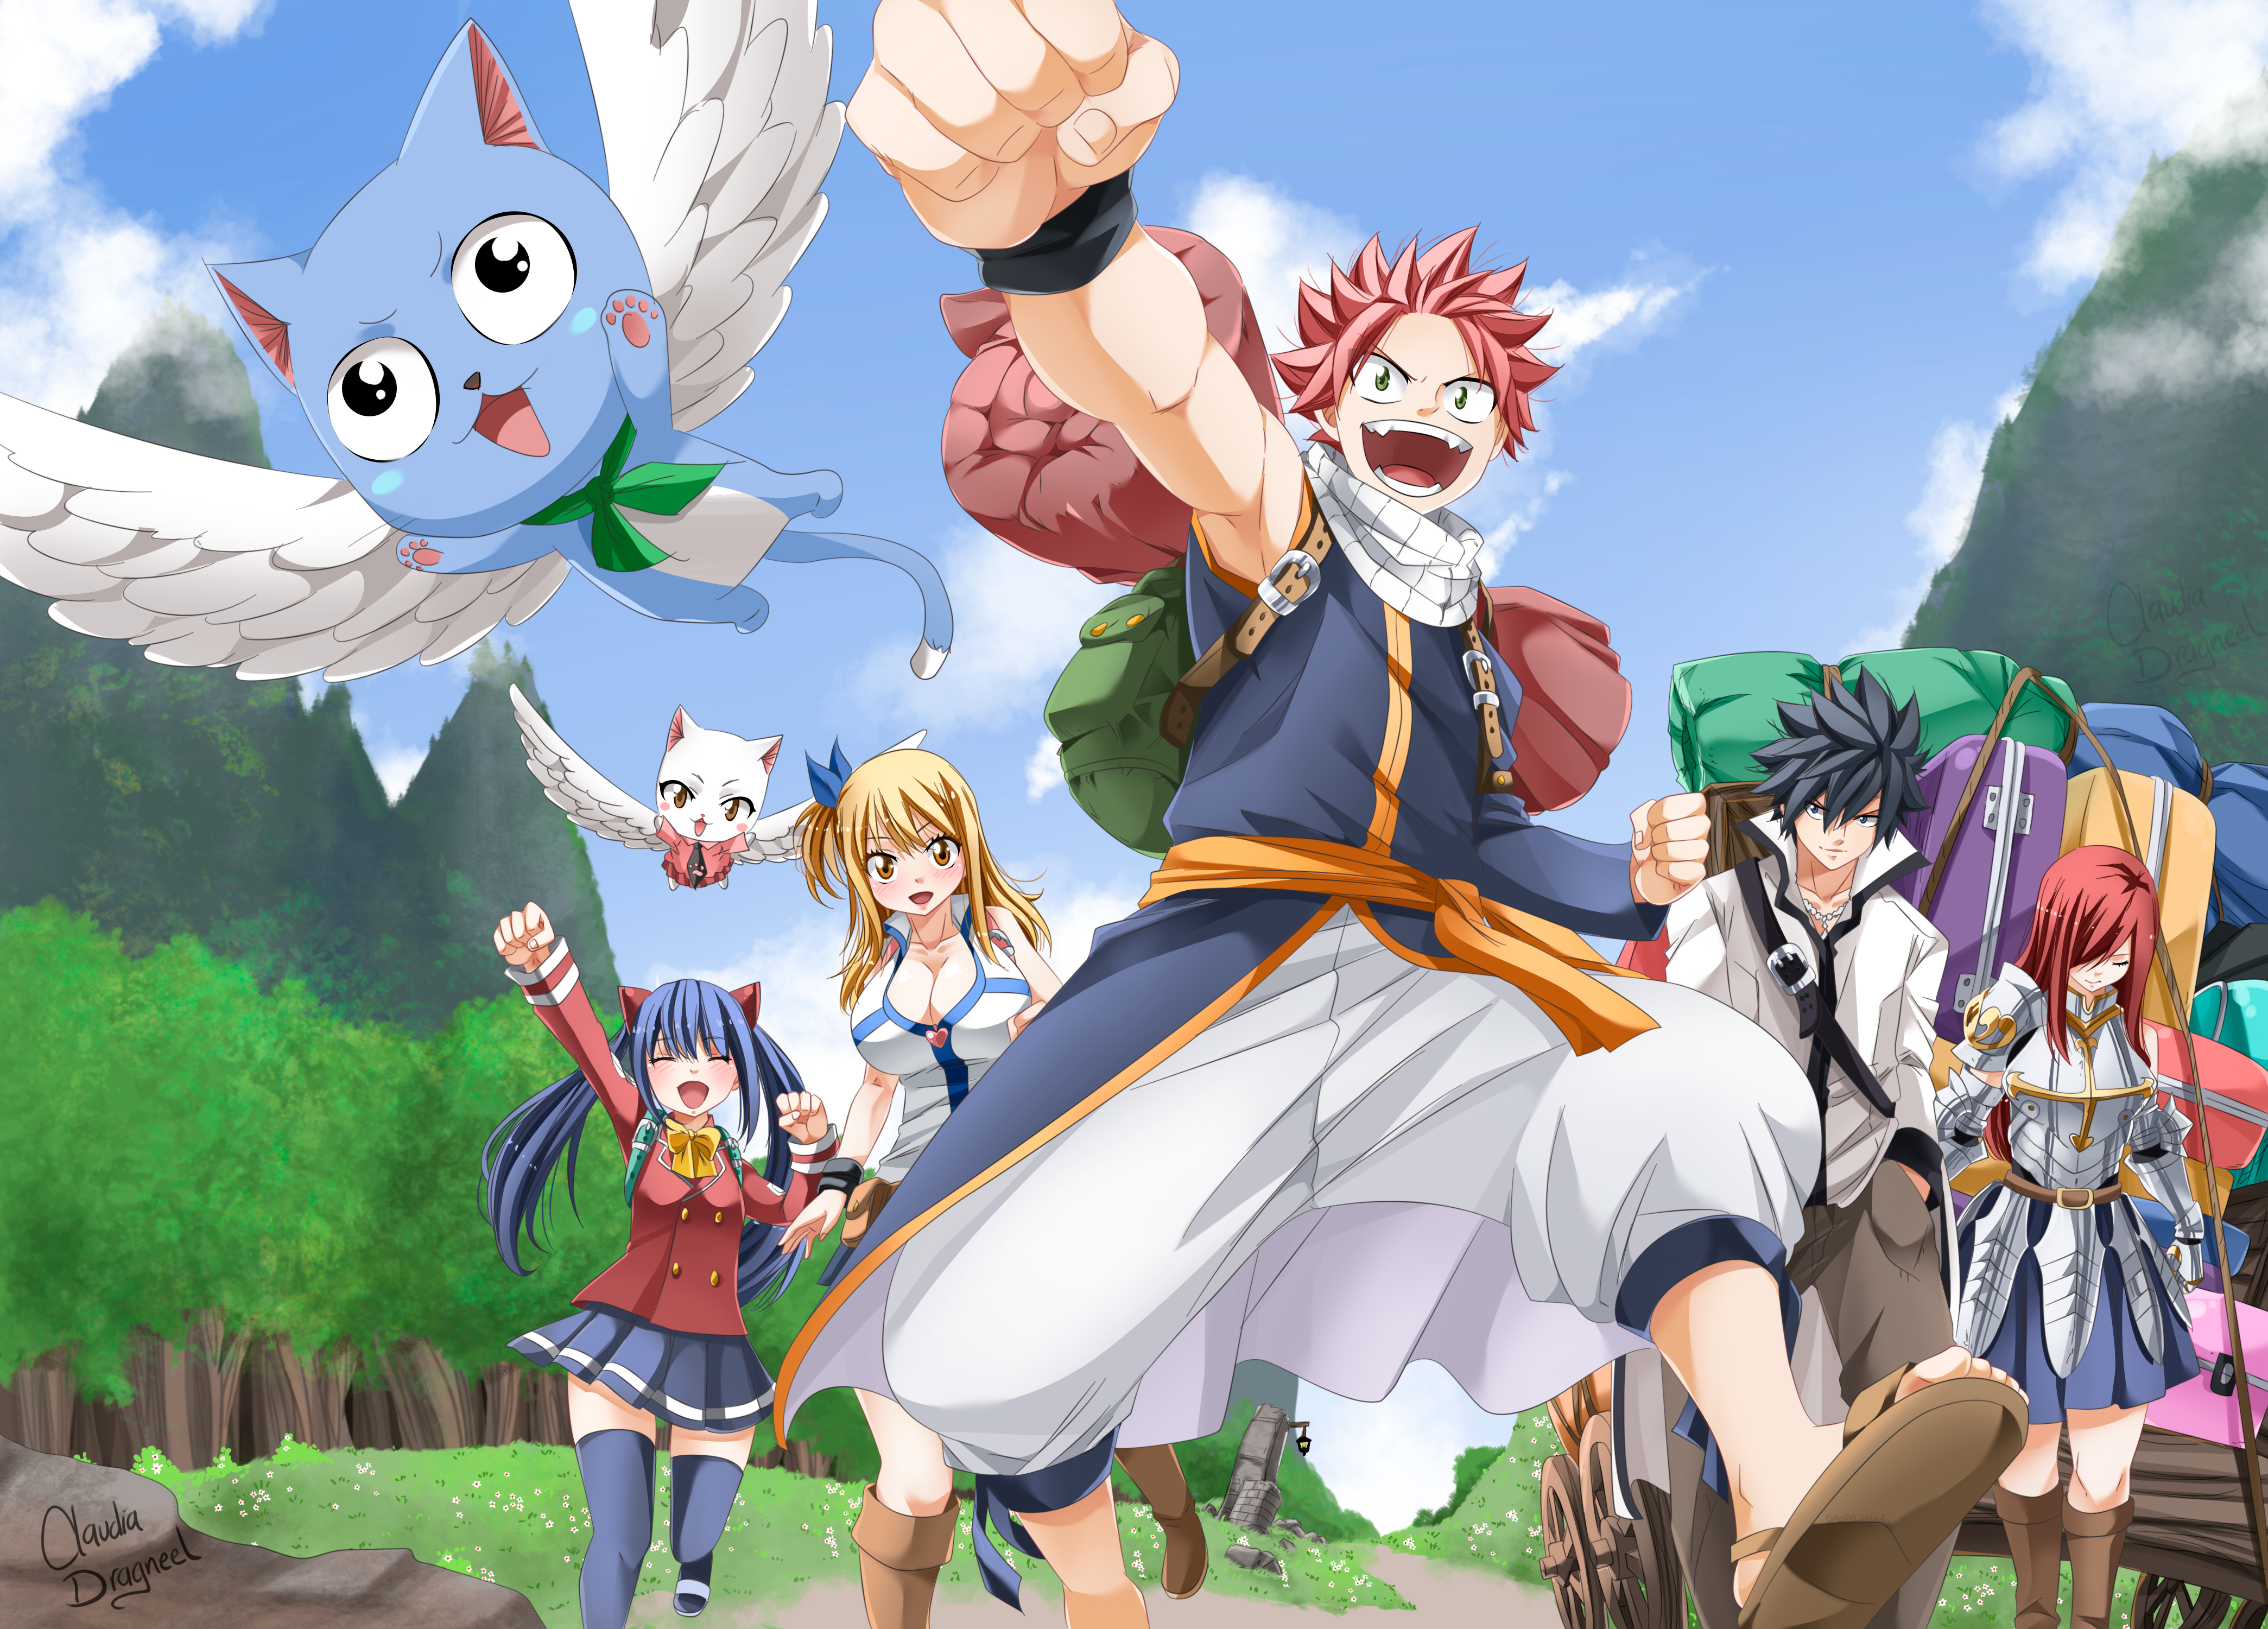 Natsu Dragneel Happy Fairy Tail Lucy Heartfilia Erza Scarlet Gray Fullbuster Wendy Marvell Charles F 4178x3001